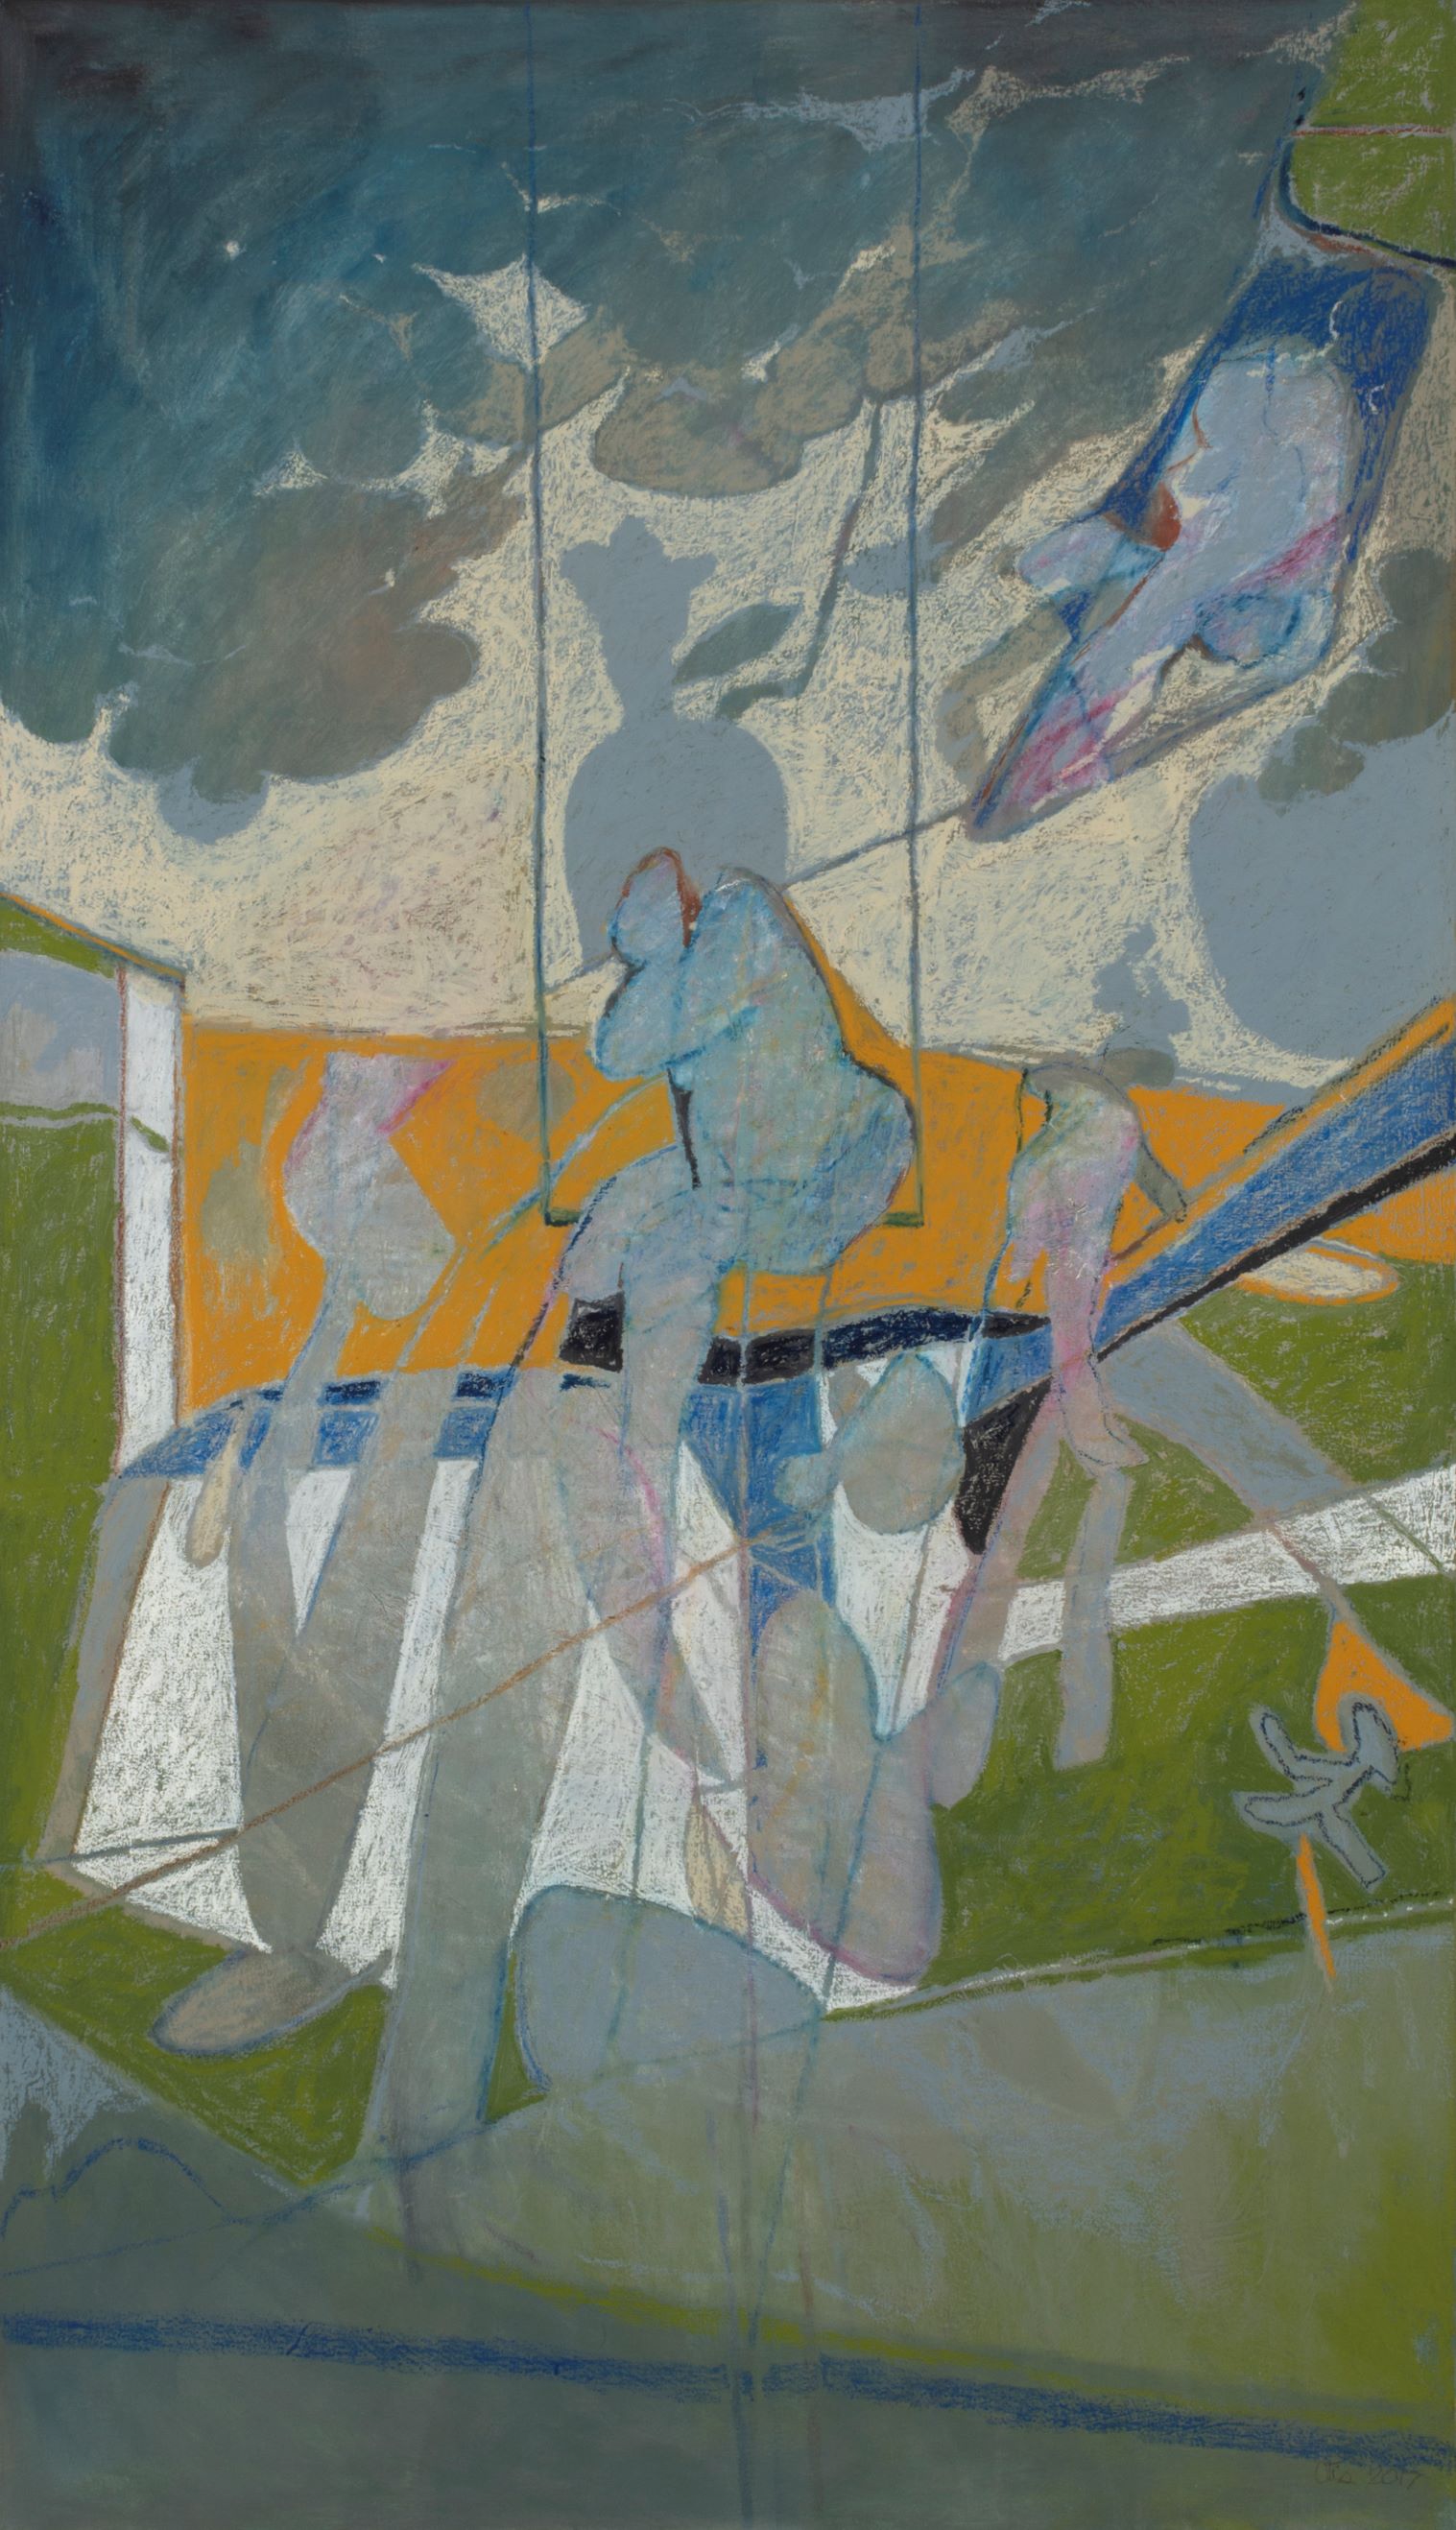 An image of a large vertical painting by Otis Huband. It has some elements of figuration as part of the abstraction.